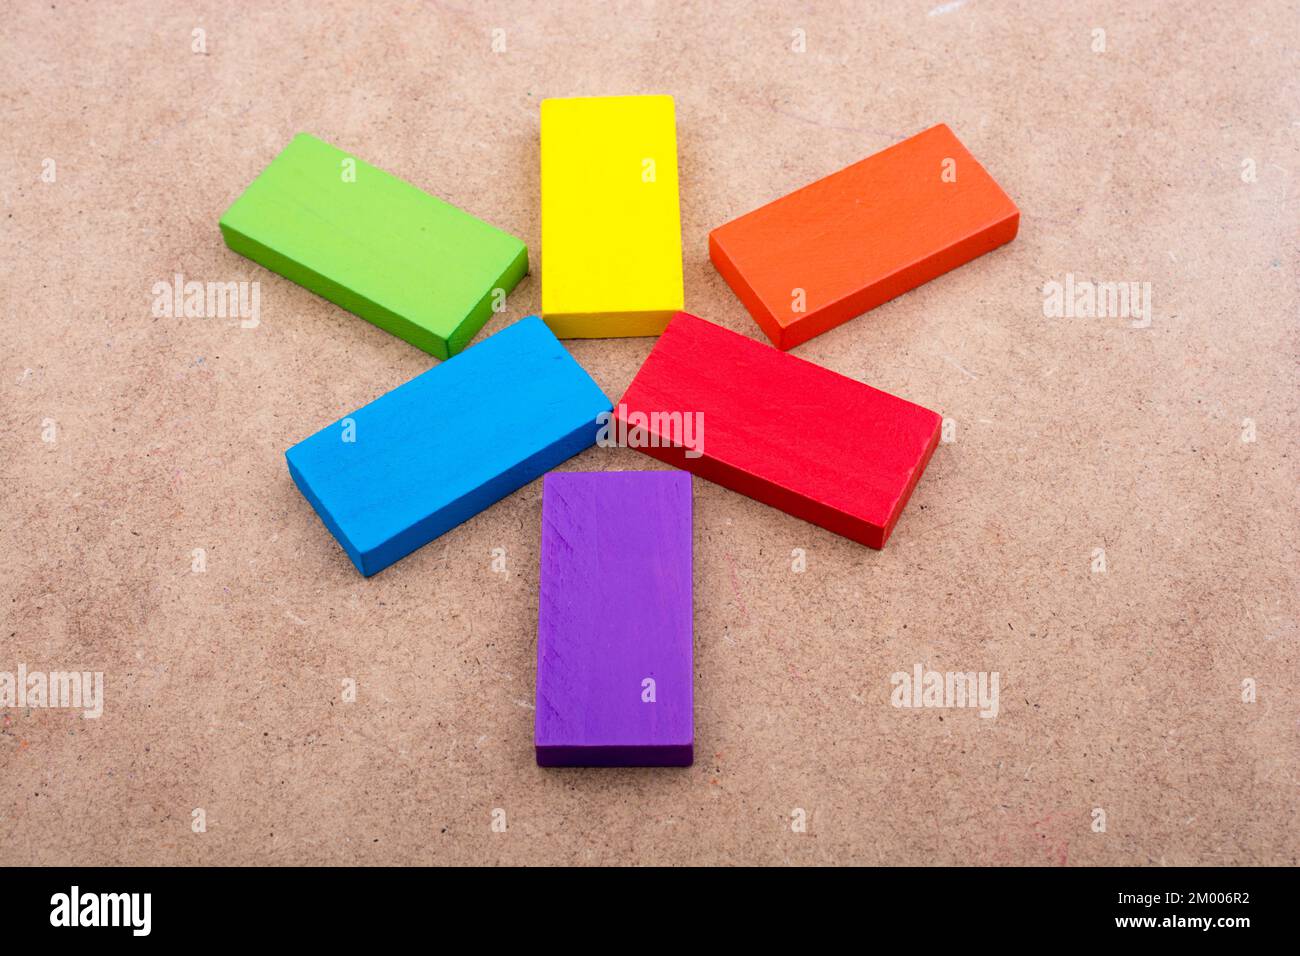 Wooden blocks on a brown background Stock Photo